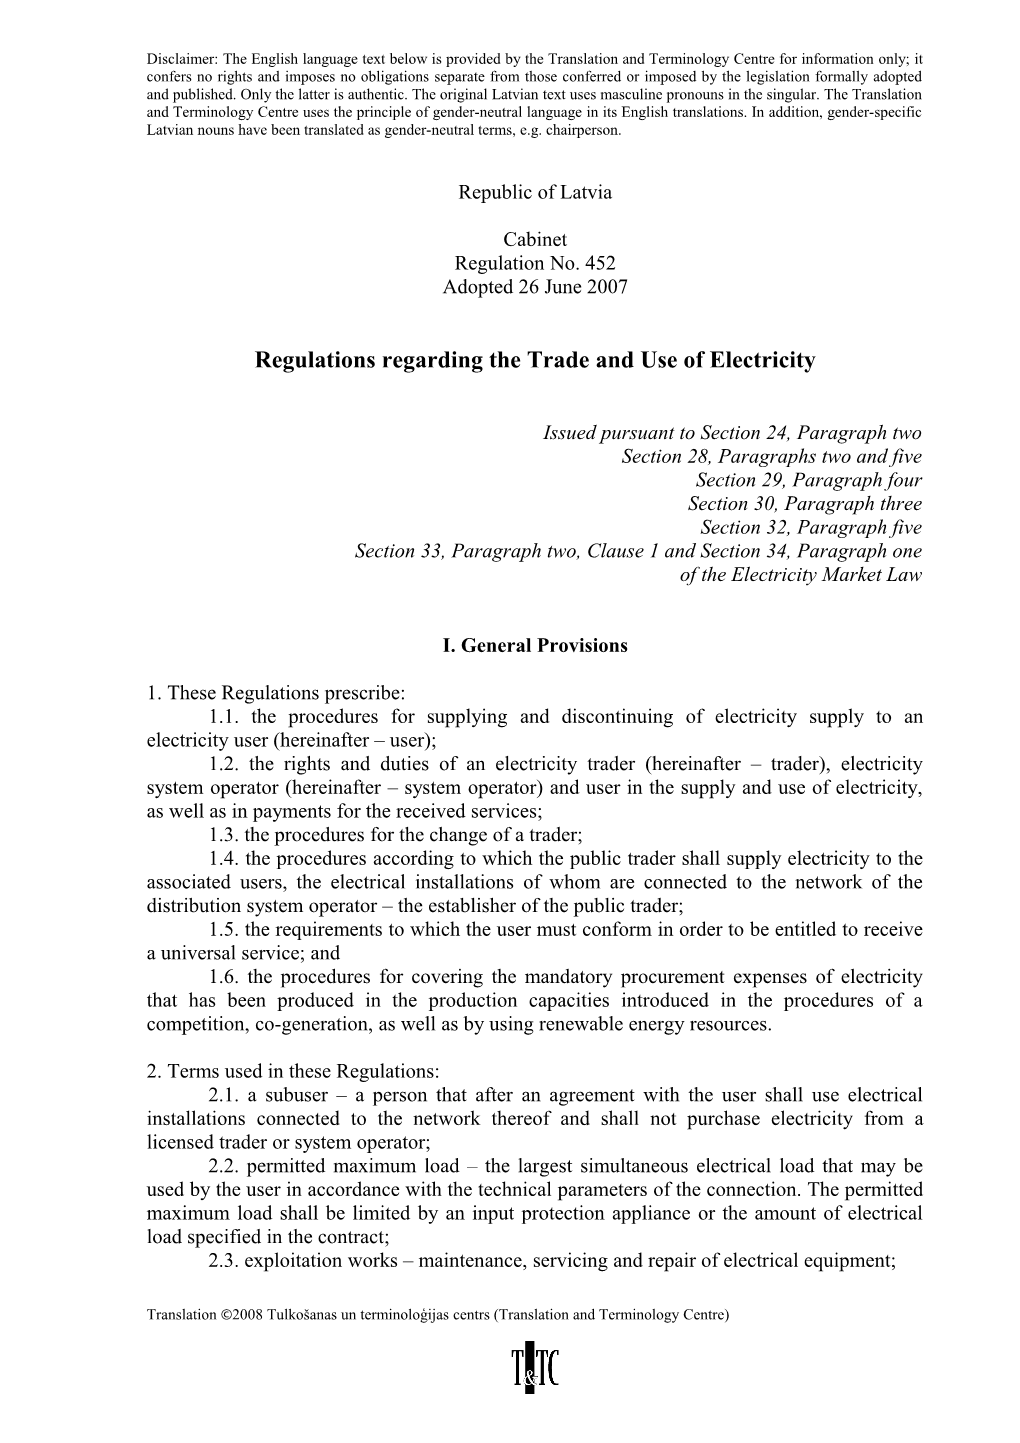 Regulations Regarding the Trade and Use of Electricity